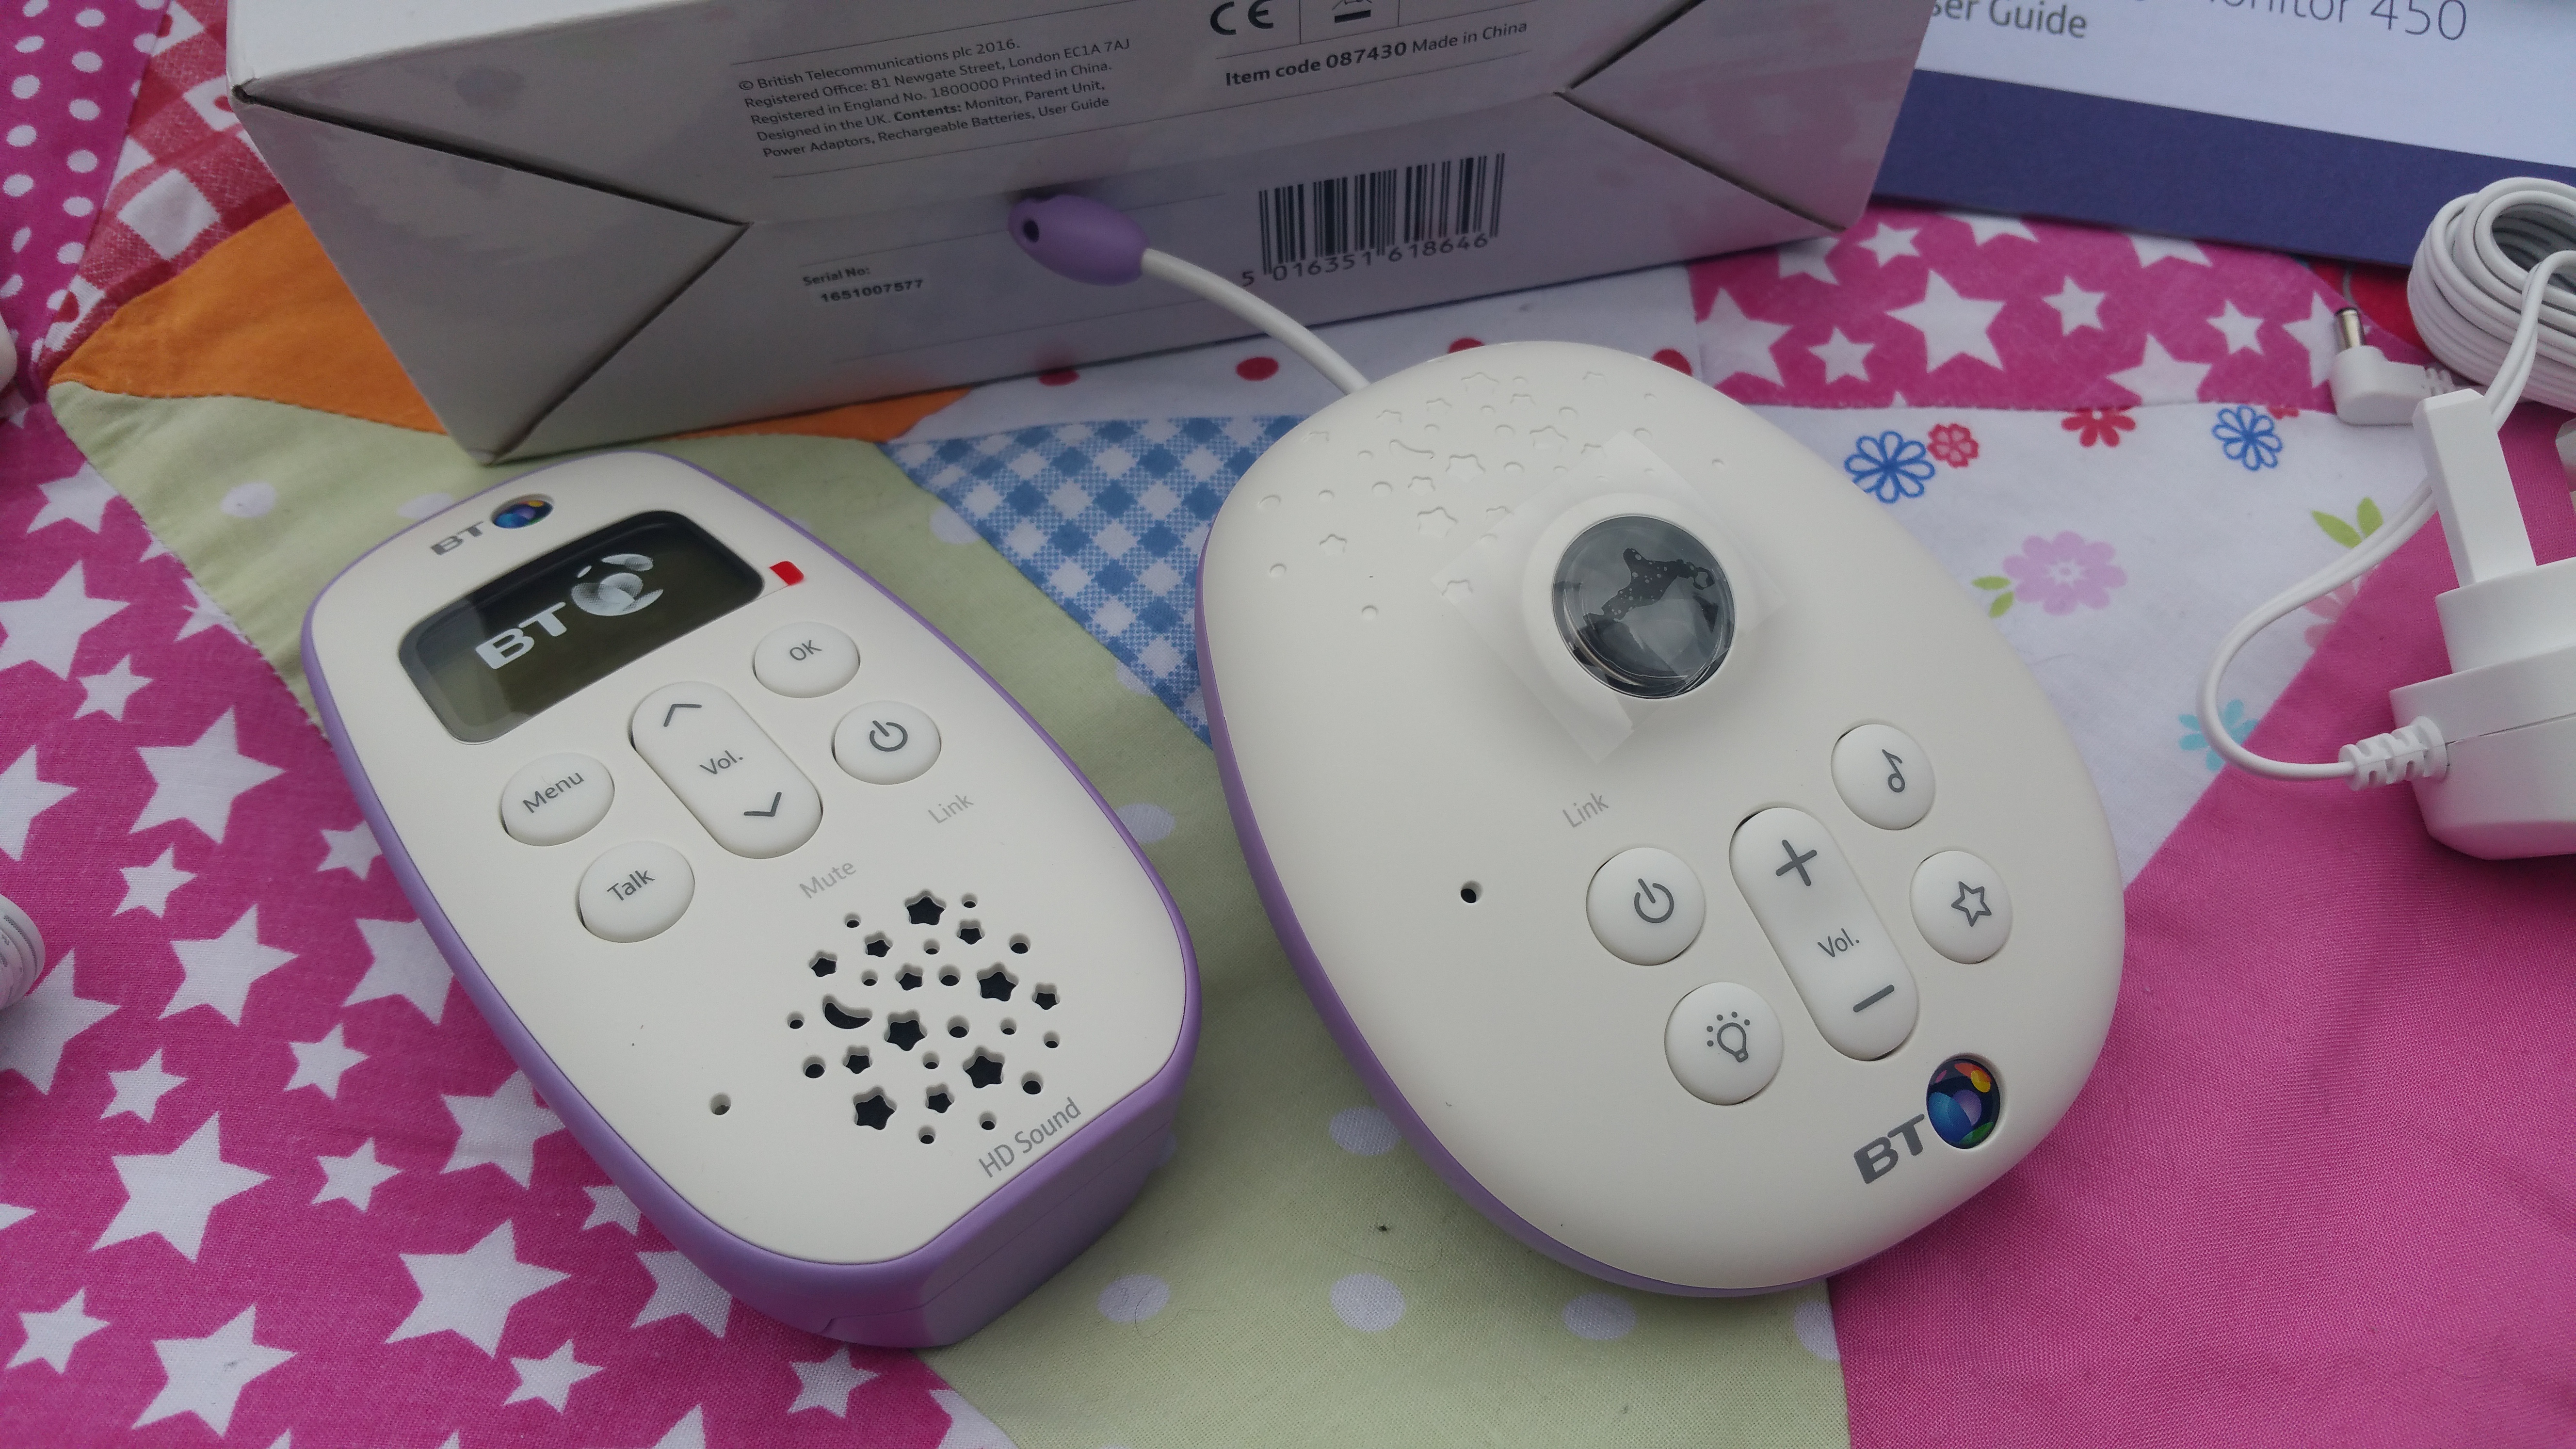 bt bm450 audio baby monitor with projector